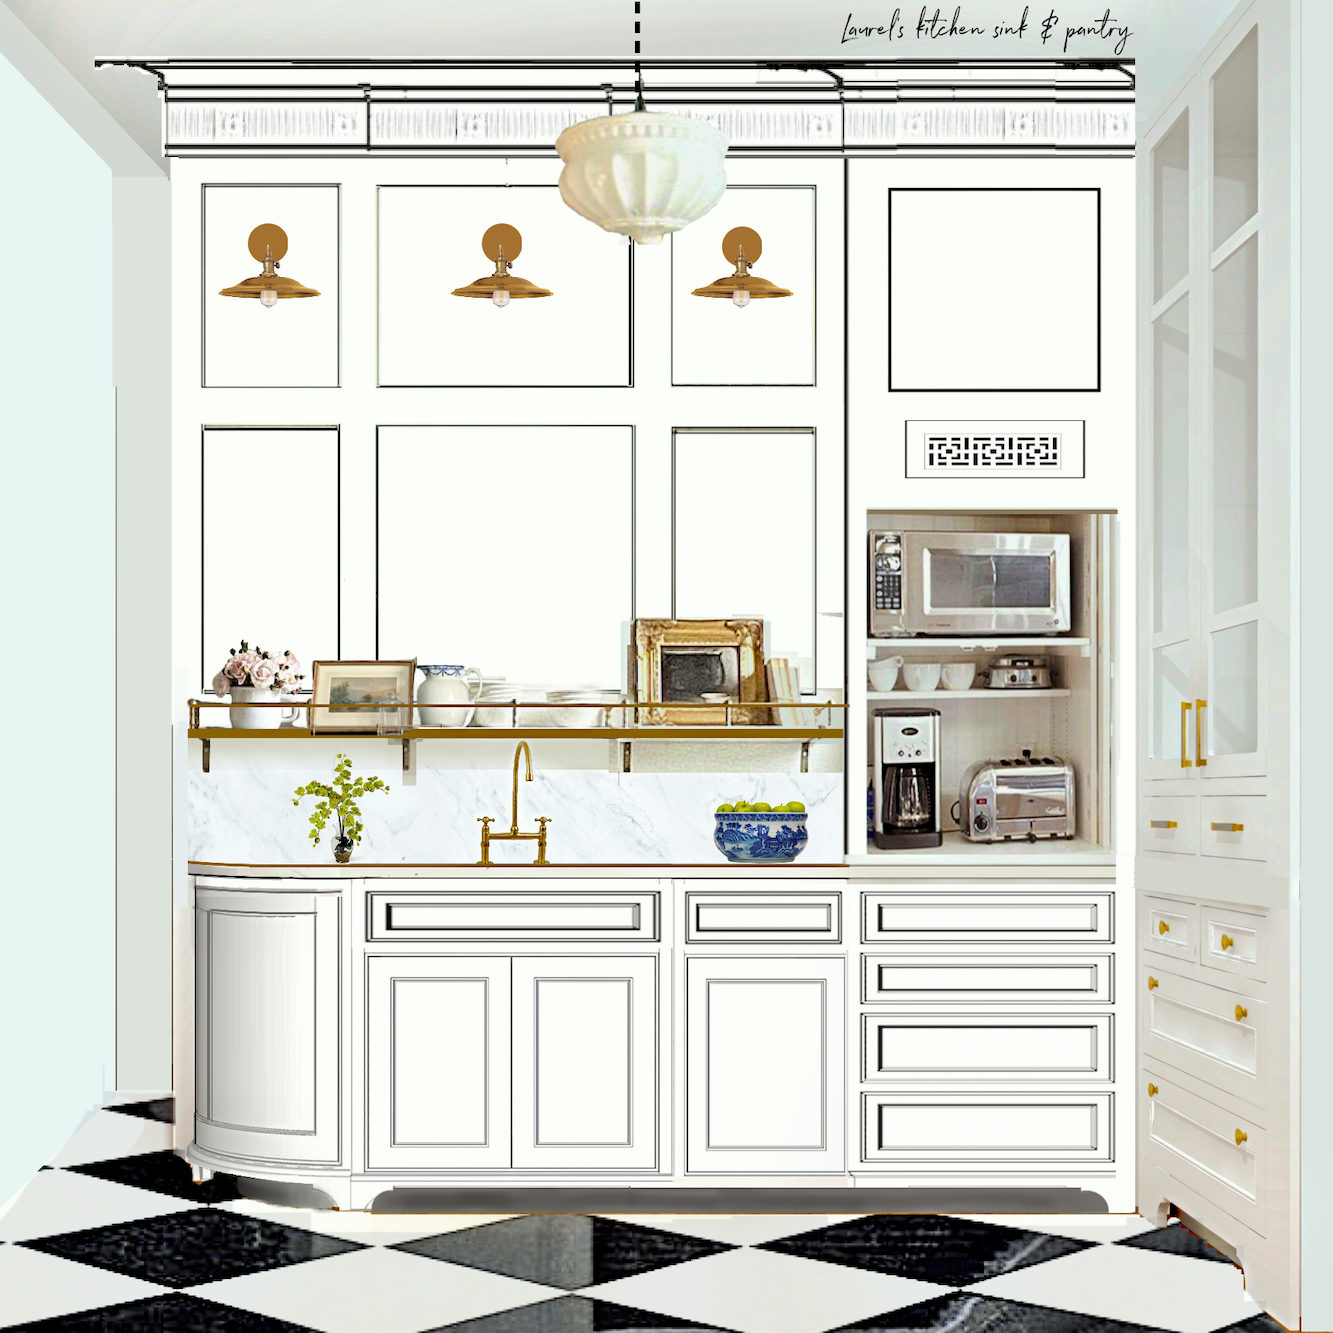 Sink wall and pantry rendering with pocket doors and 18" dishwasher